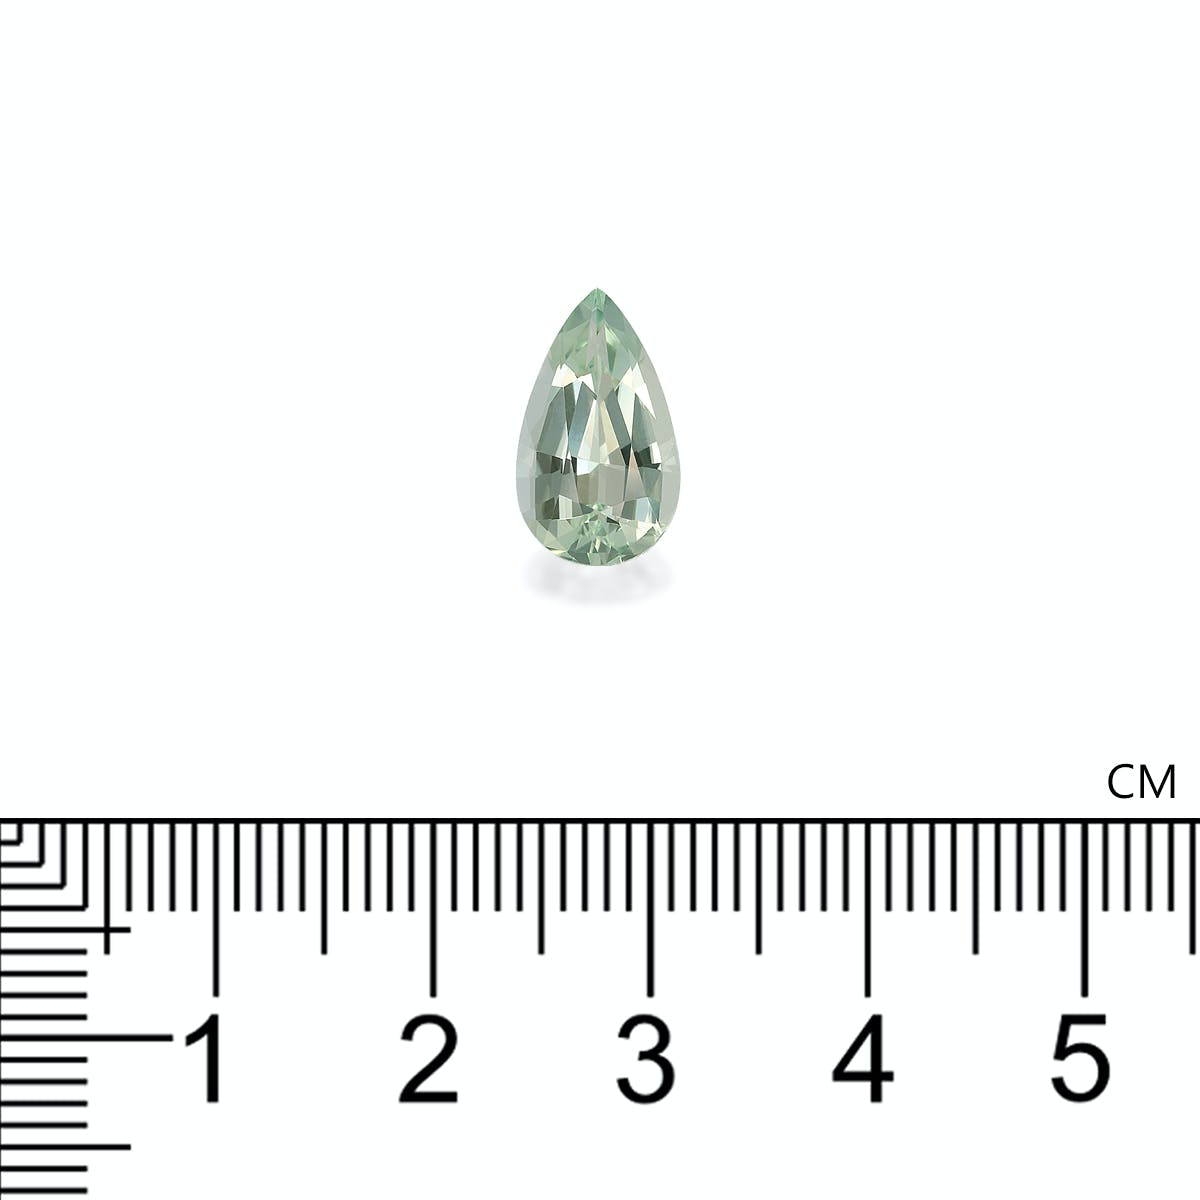 Picture of Mist Green Tourmaline 2.97ct (TG1587)